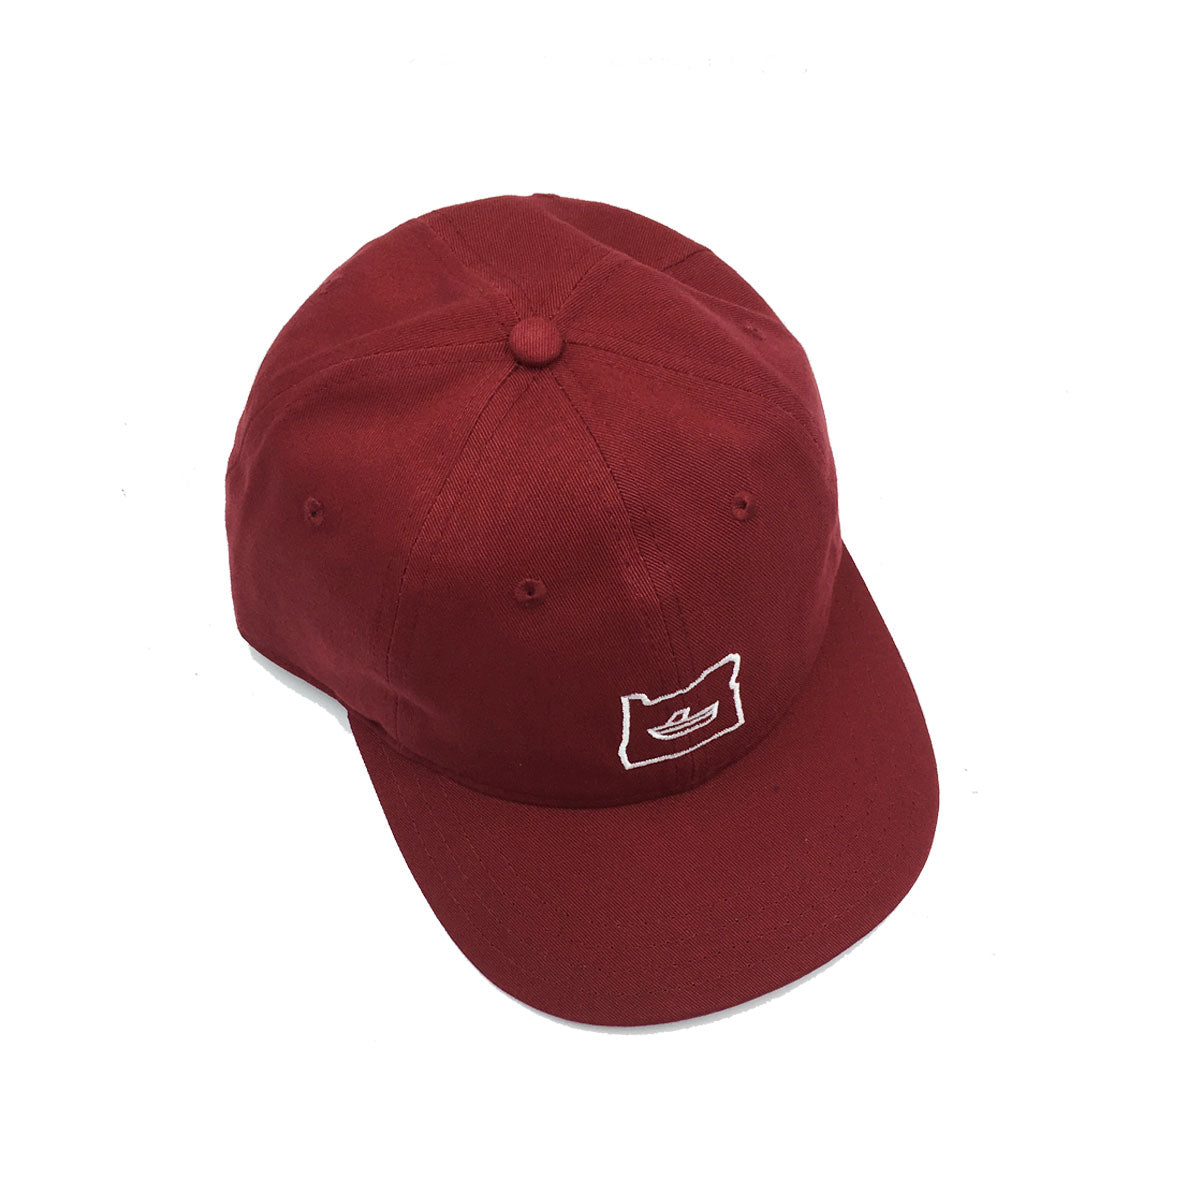 AWS Oregon Boater's Cap - Red